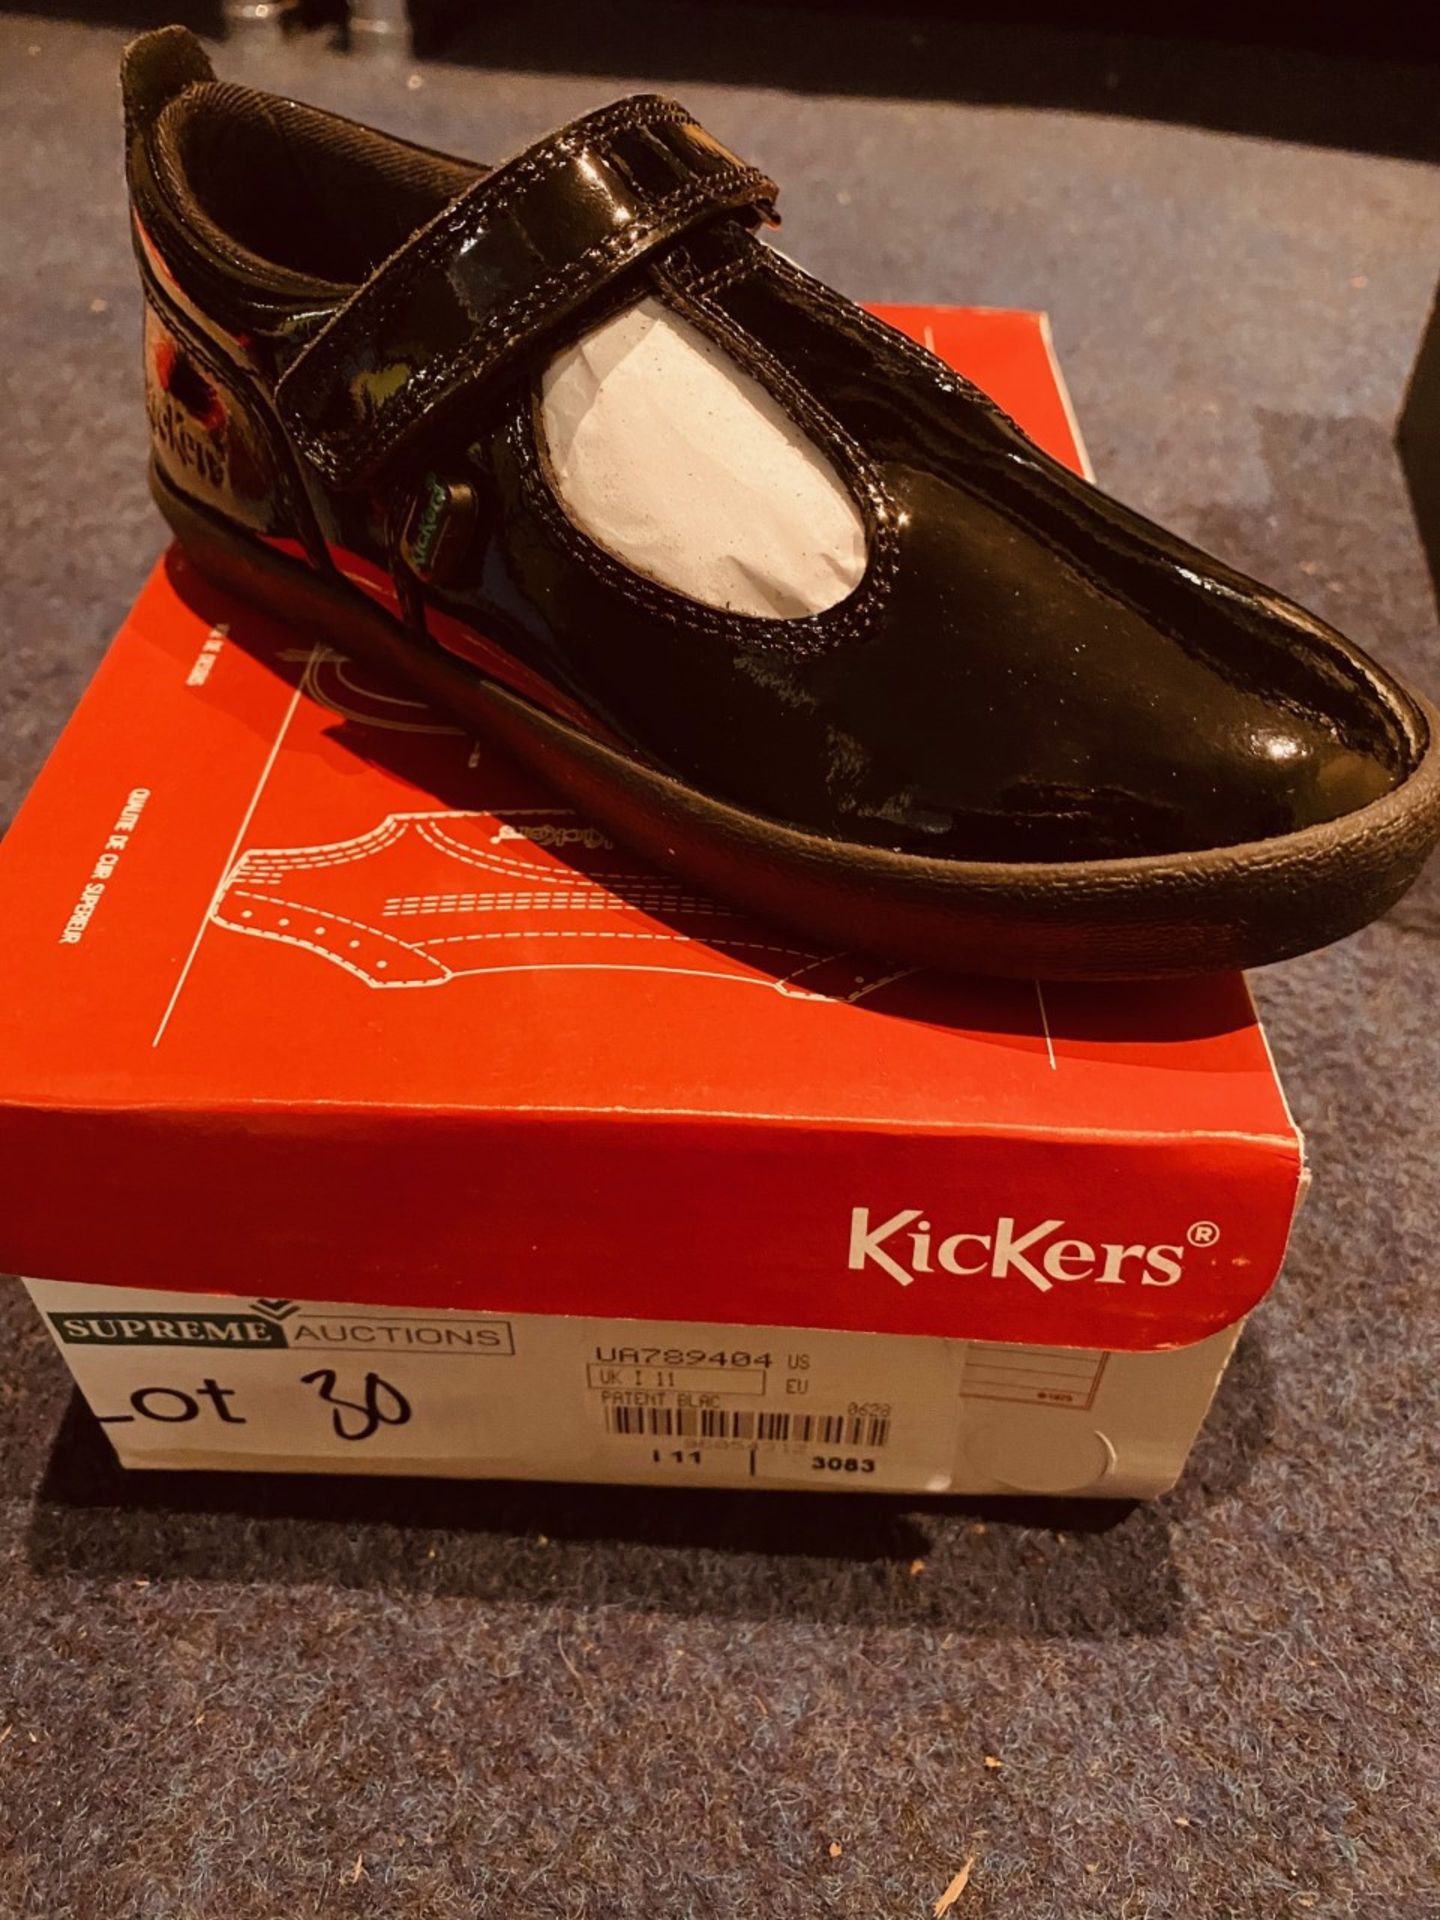 NEW AND BOXED KICKERS PATENT BLACK I-11